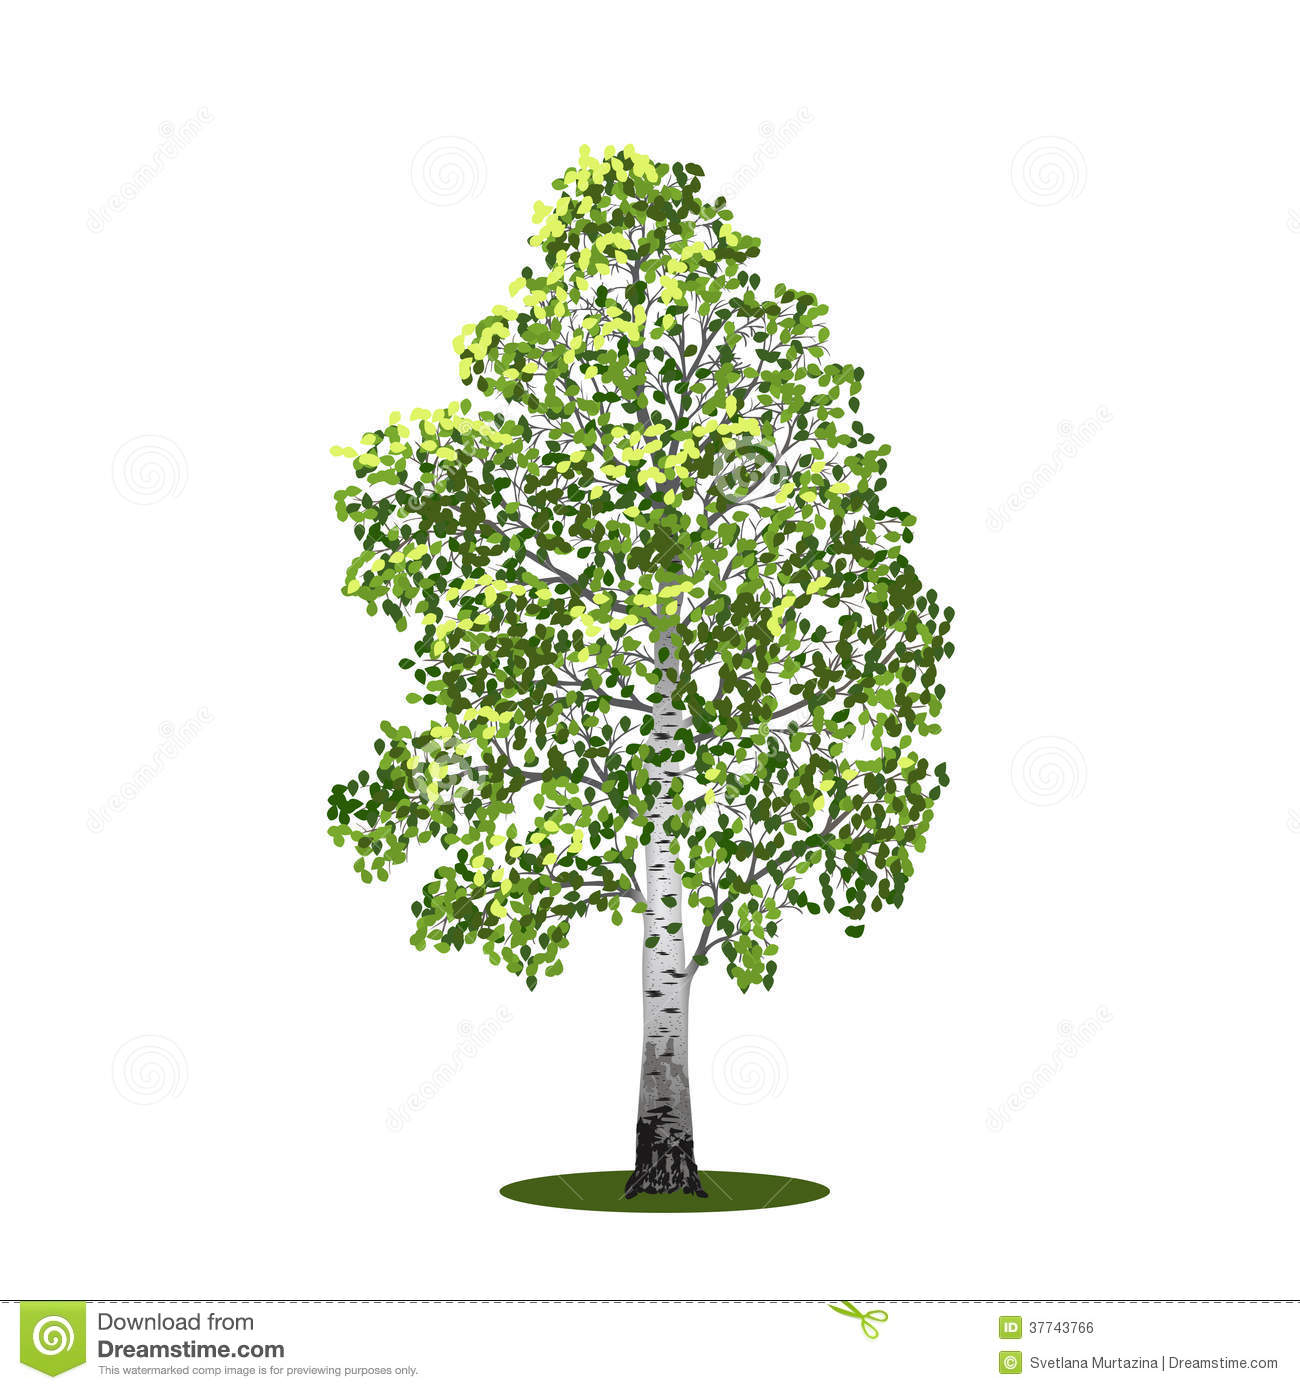 Detached Tree Birch With Leaves Vector Illustrati Royalty Free Stock